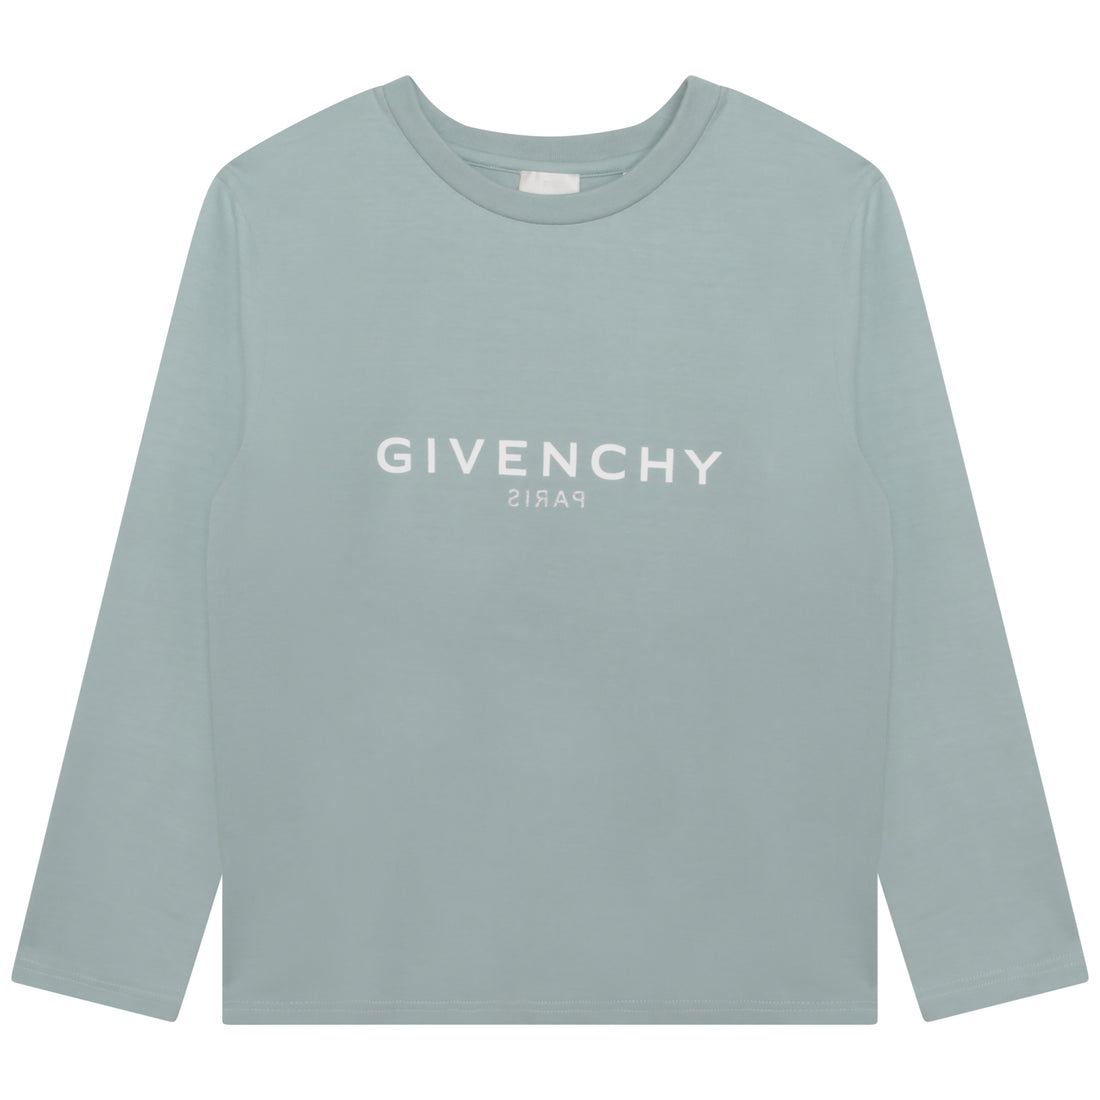 Givenchy Long Sleeve T-Shirt Style: H25448